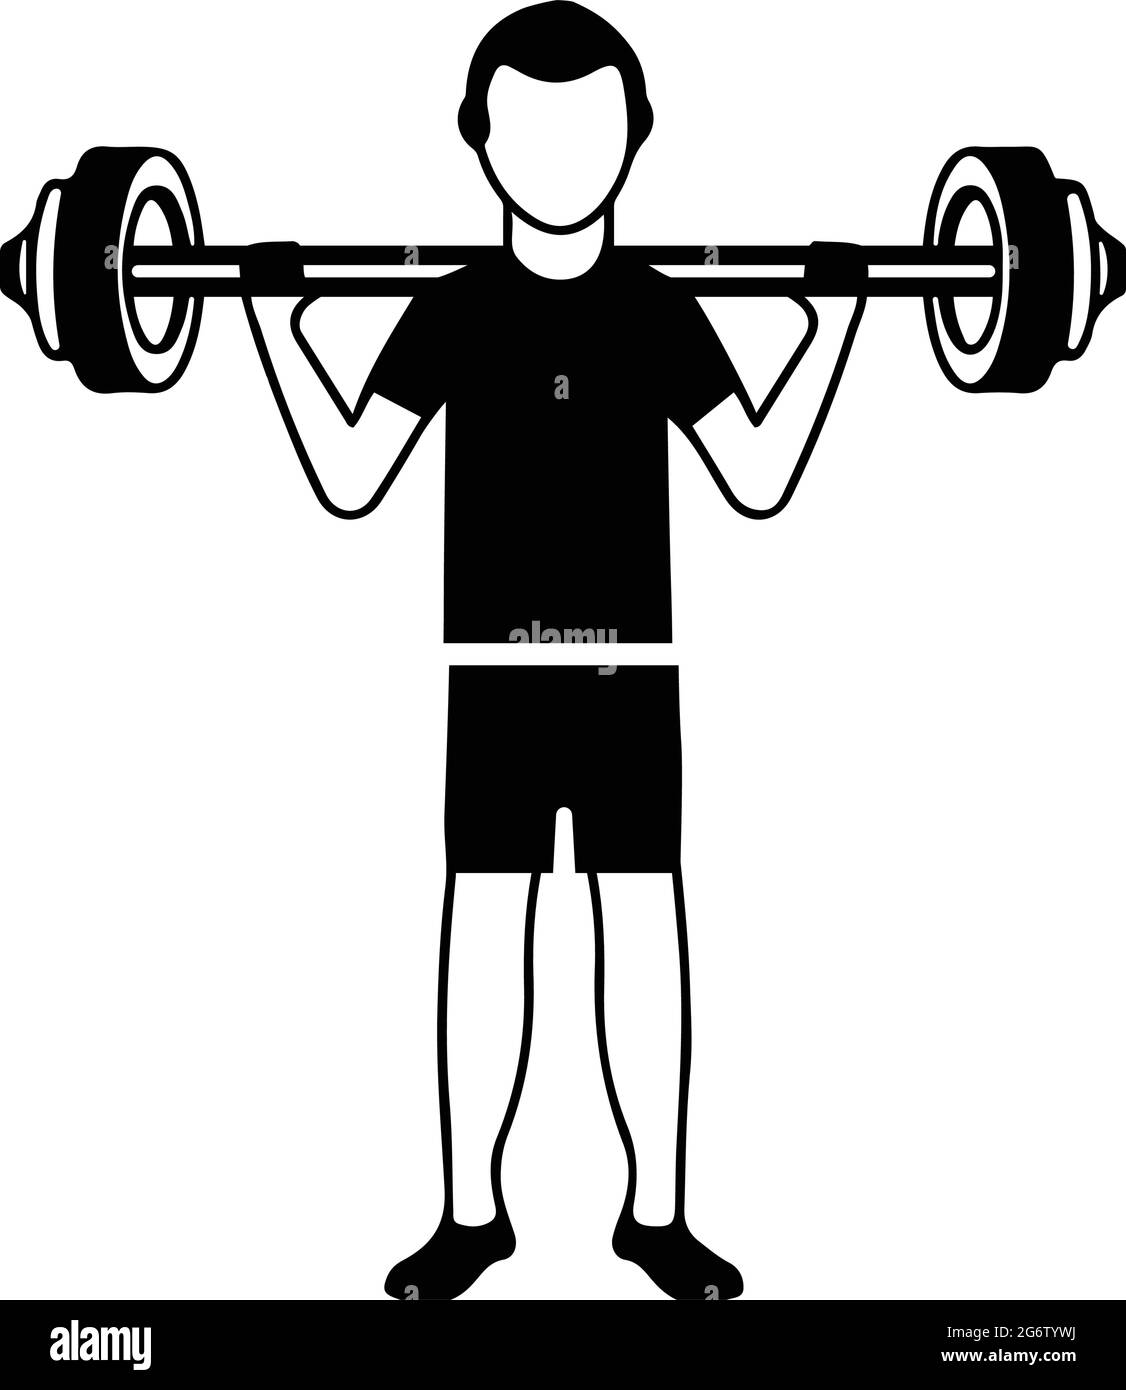 Best Free Stickman doing weight lifting Illustration download in PNG &  Vector format